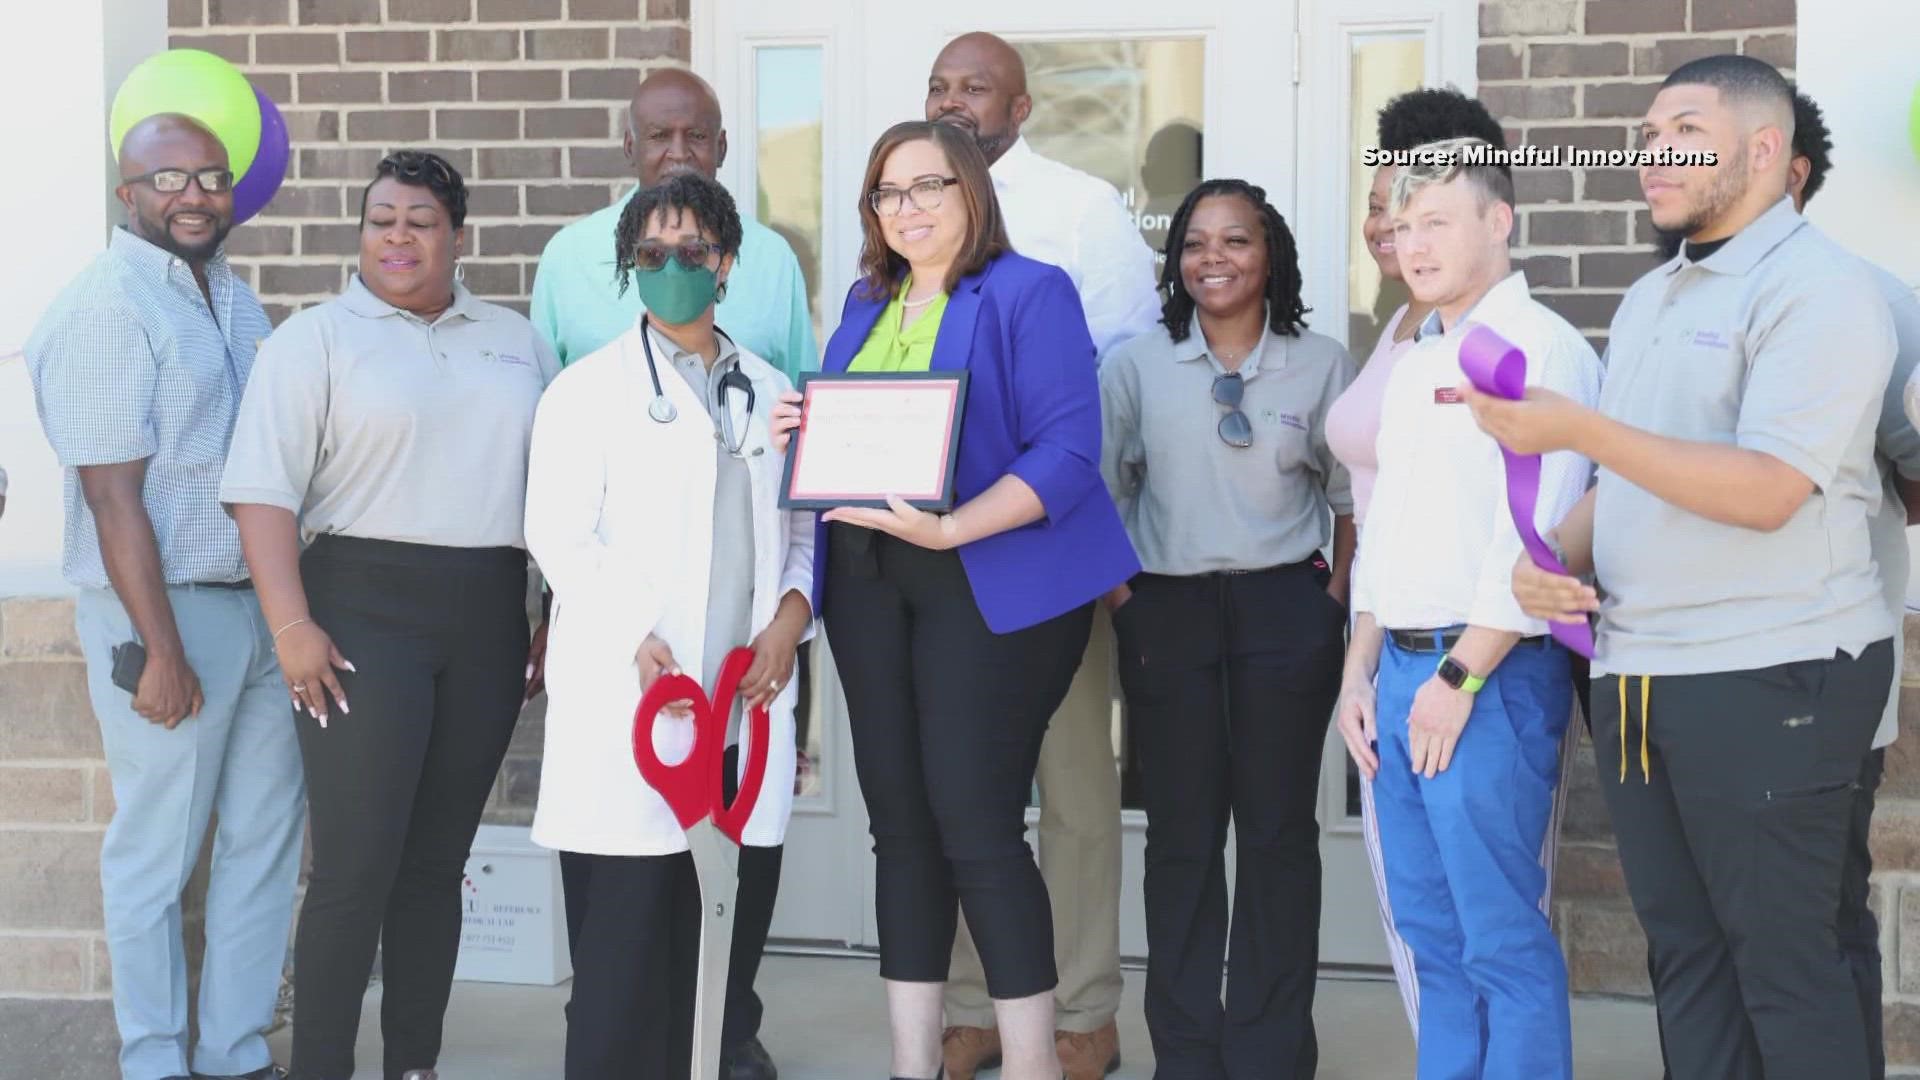 A new health care clinic brings diversity to High Point by focusing on both mental and physical health.